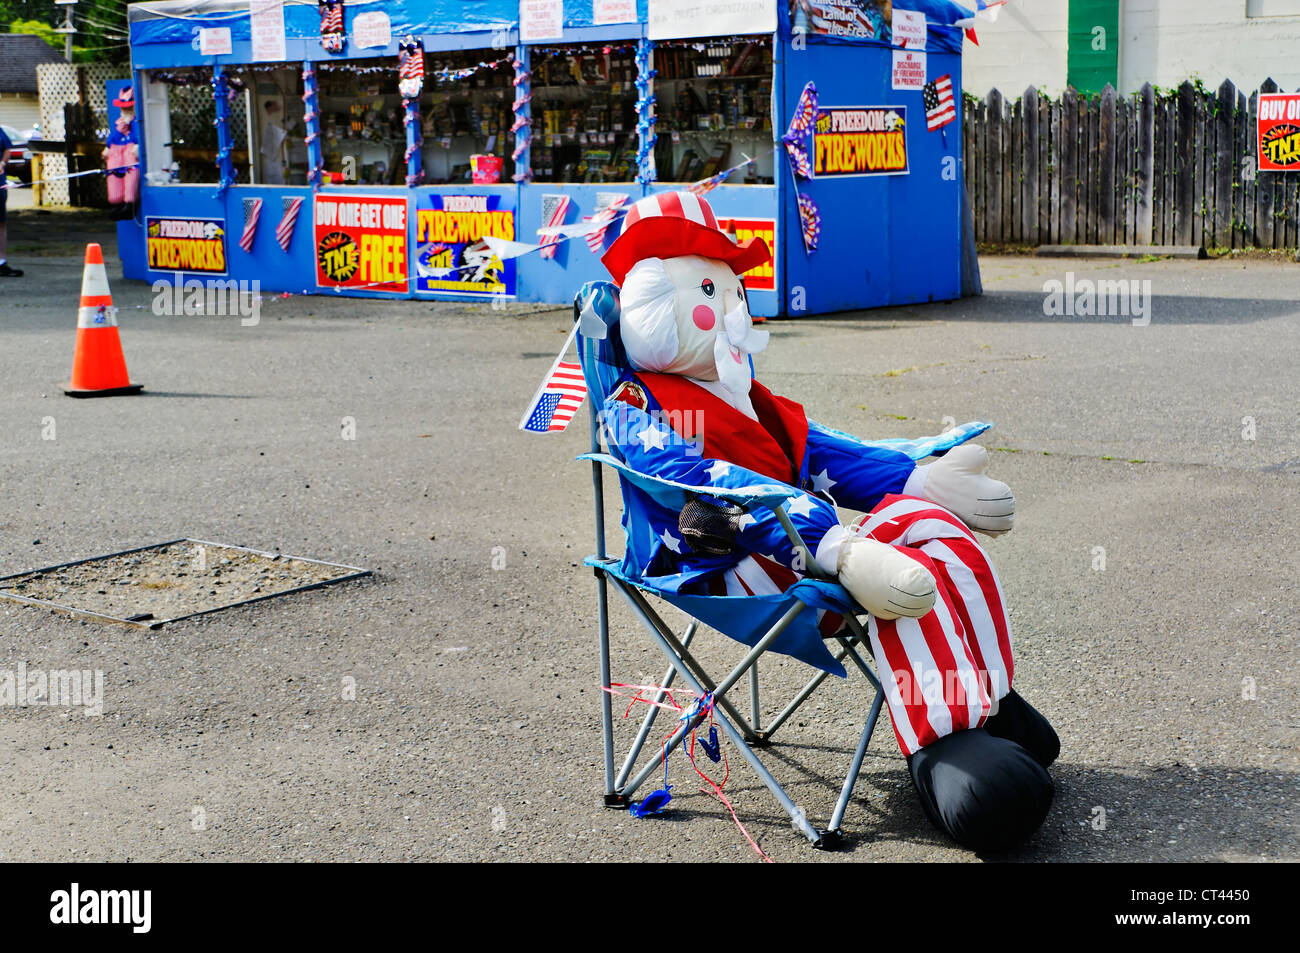 An inflatable life-size Uncle Sam figure sits in a chair in front of a fireworks stand with patriotic charm and appeal. Stock Photo